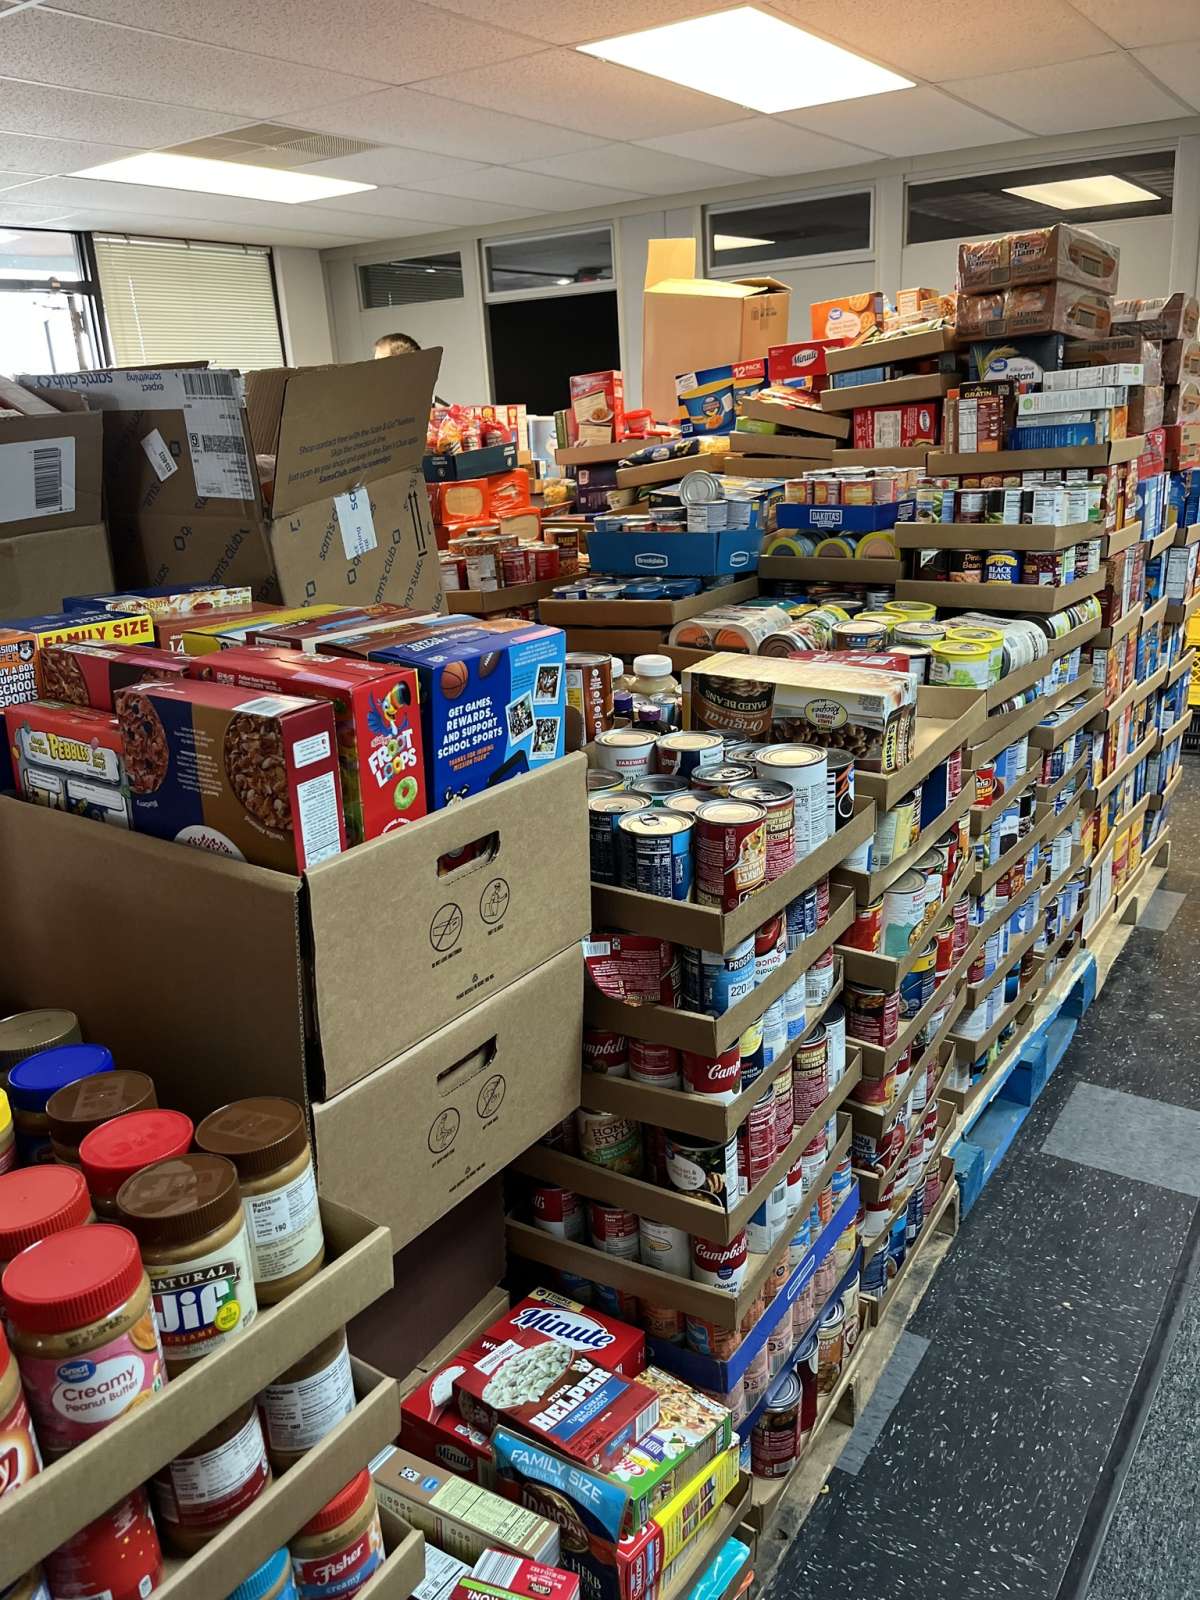 Stacks of donated, non-perishable food in MICA's storage room.